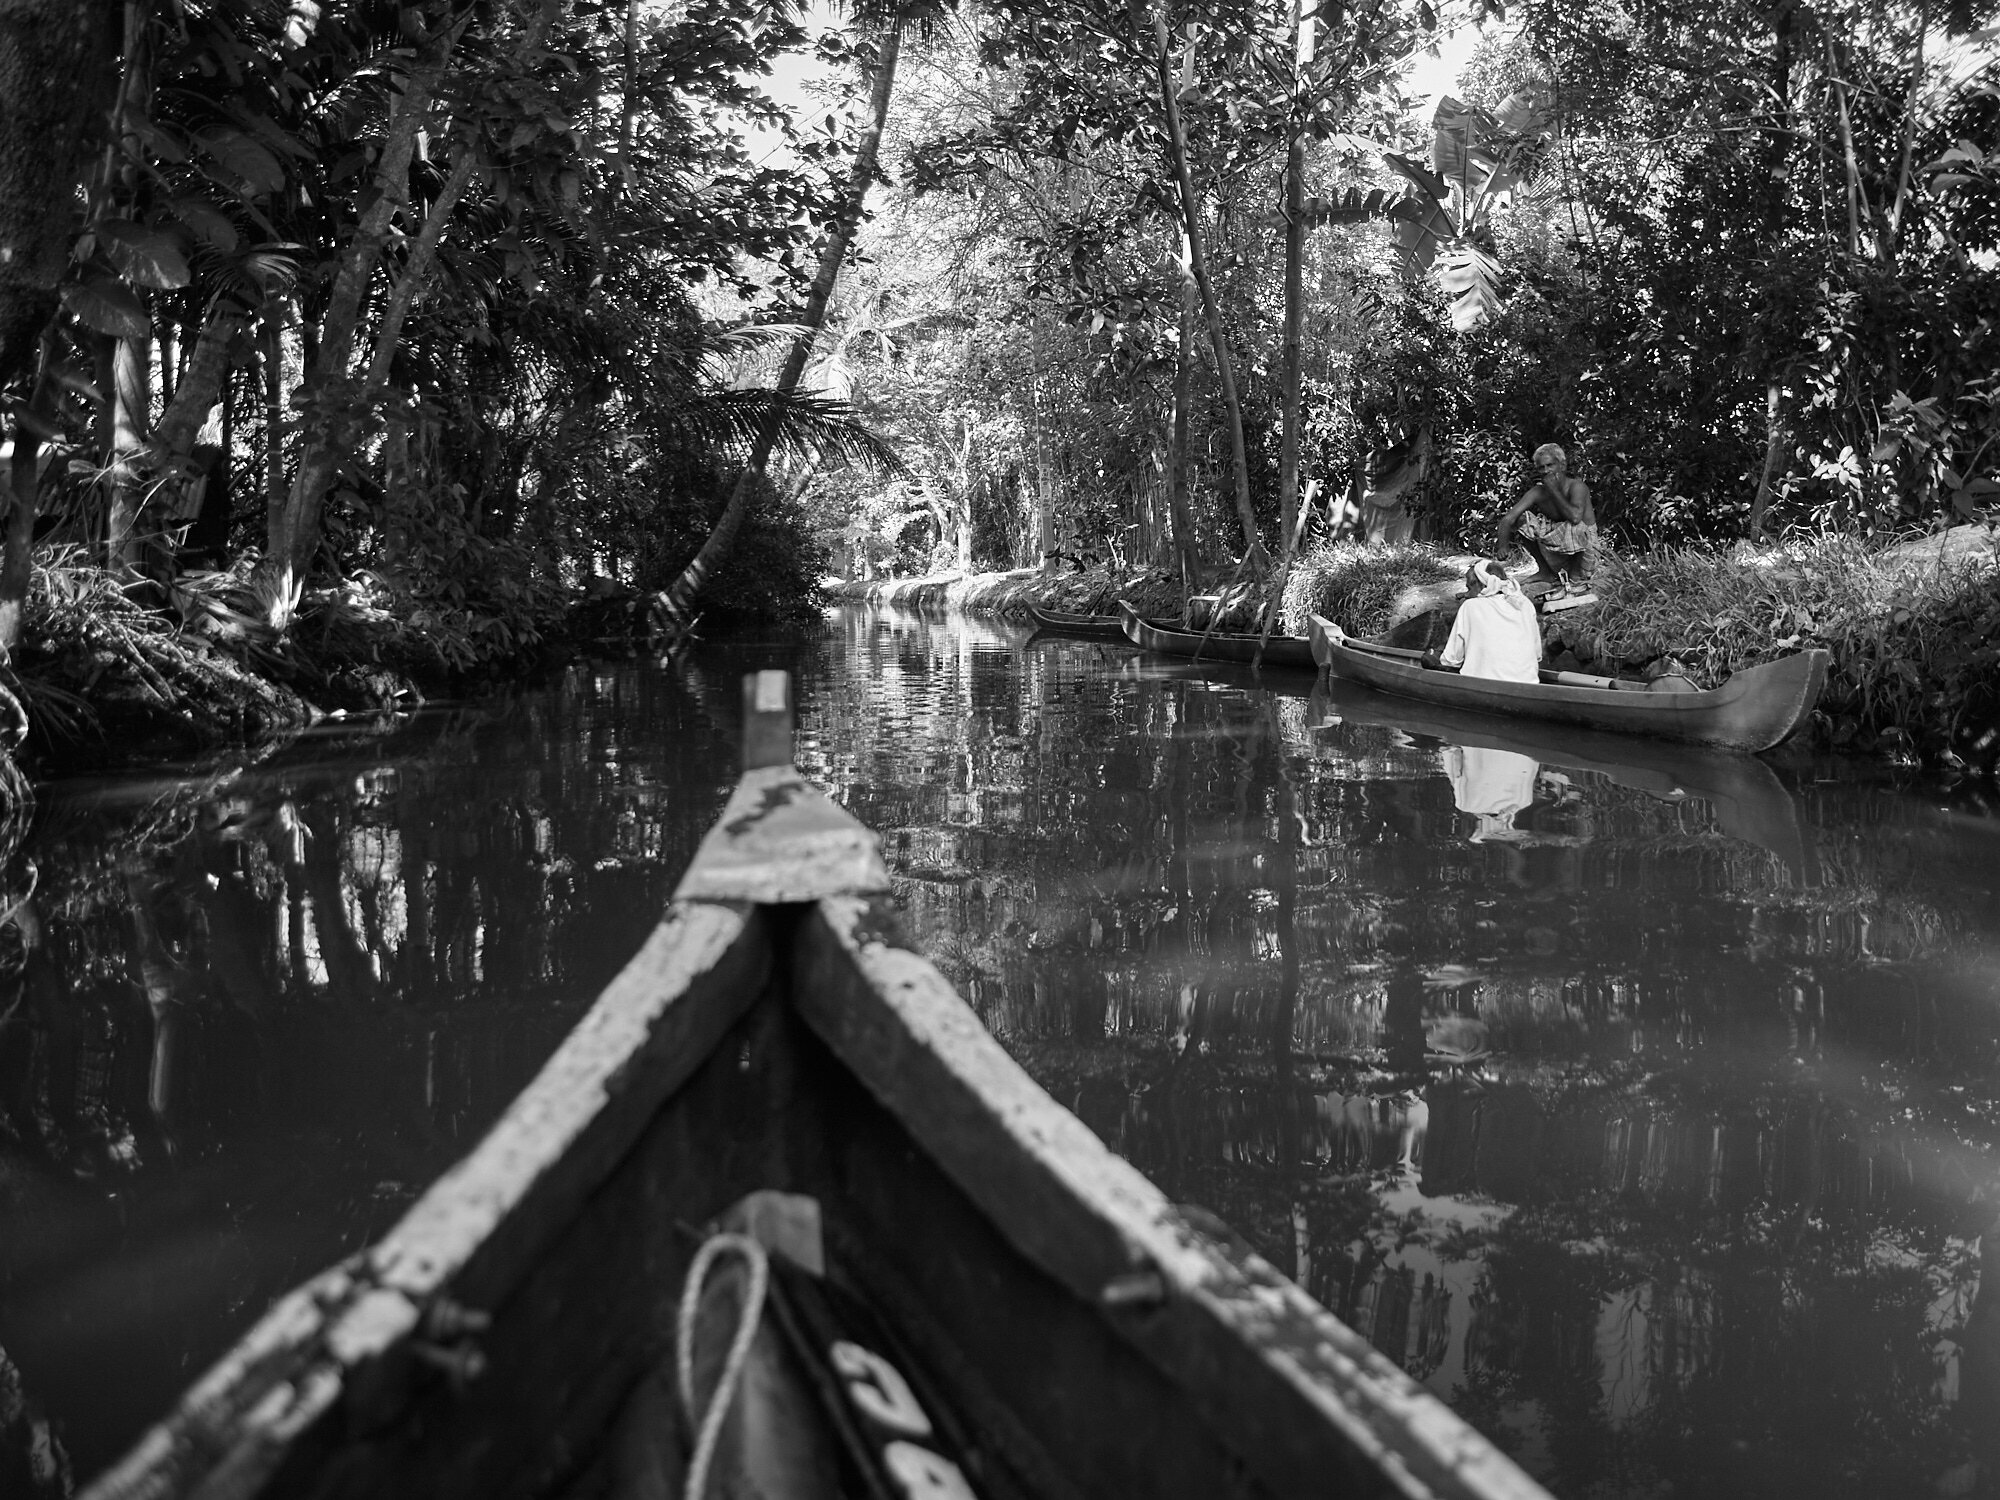  A wooden boat was navigating through the much smaller waterways connecting the smaller villages in Alappuzha, Kerala. 